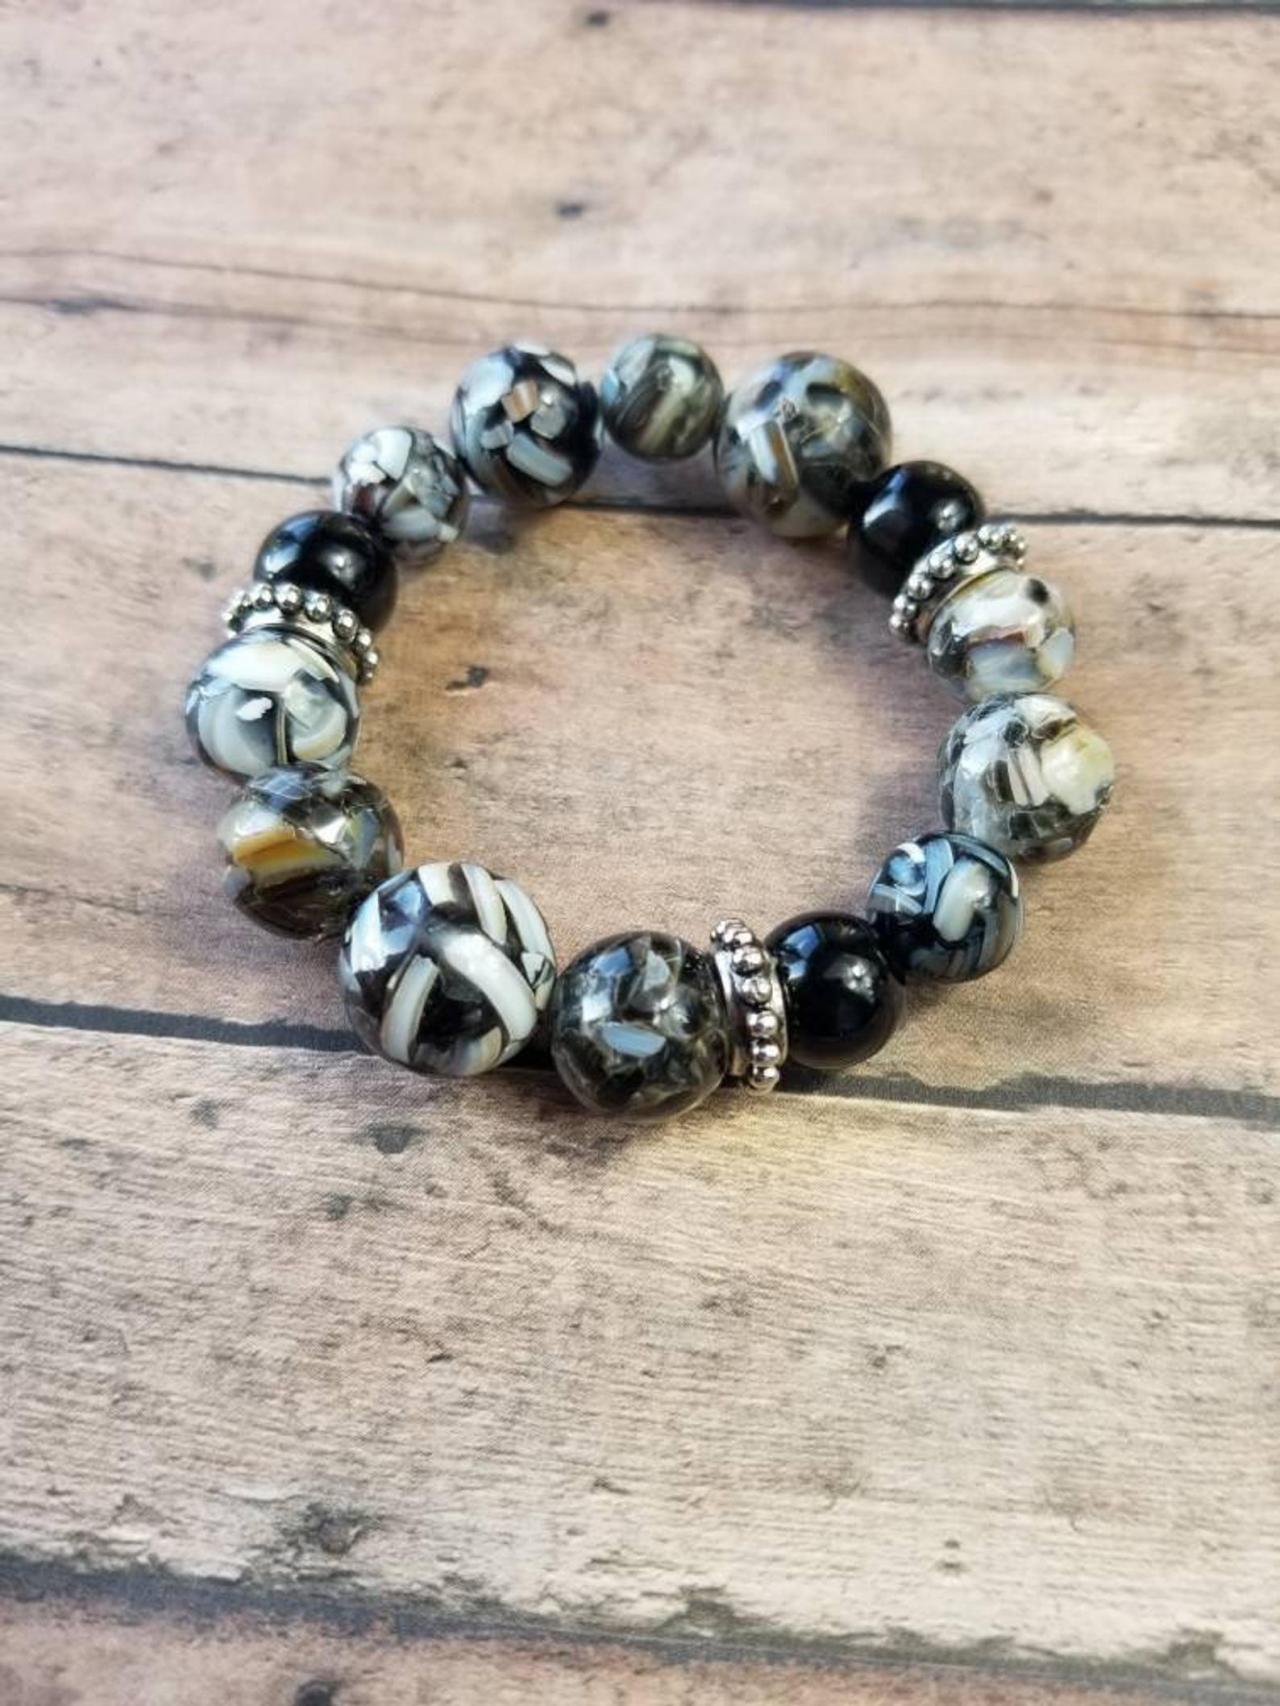 Chunky Mother Of Pearl Bracelet, Black And Grey Bracelets, Smokey Gray Bracelets, Chunky Black Bracelets, Black Bracelets, Multi Bracelets